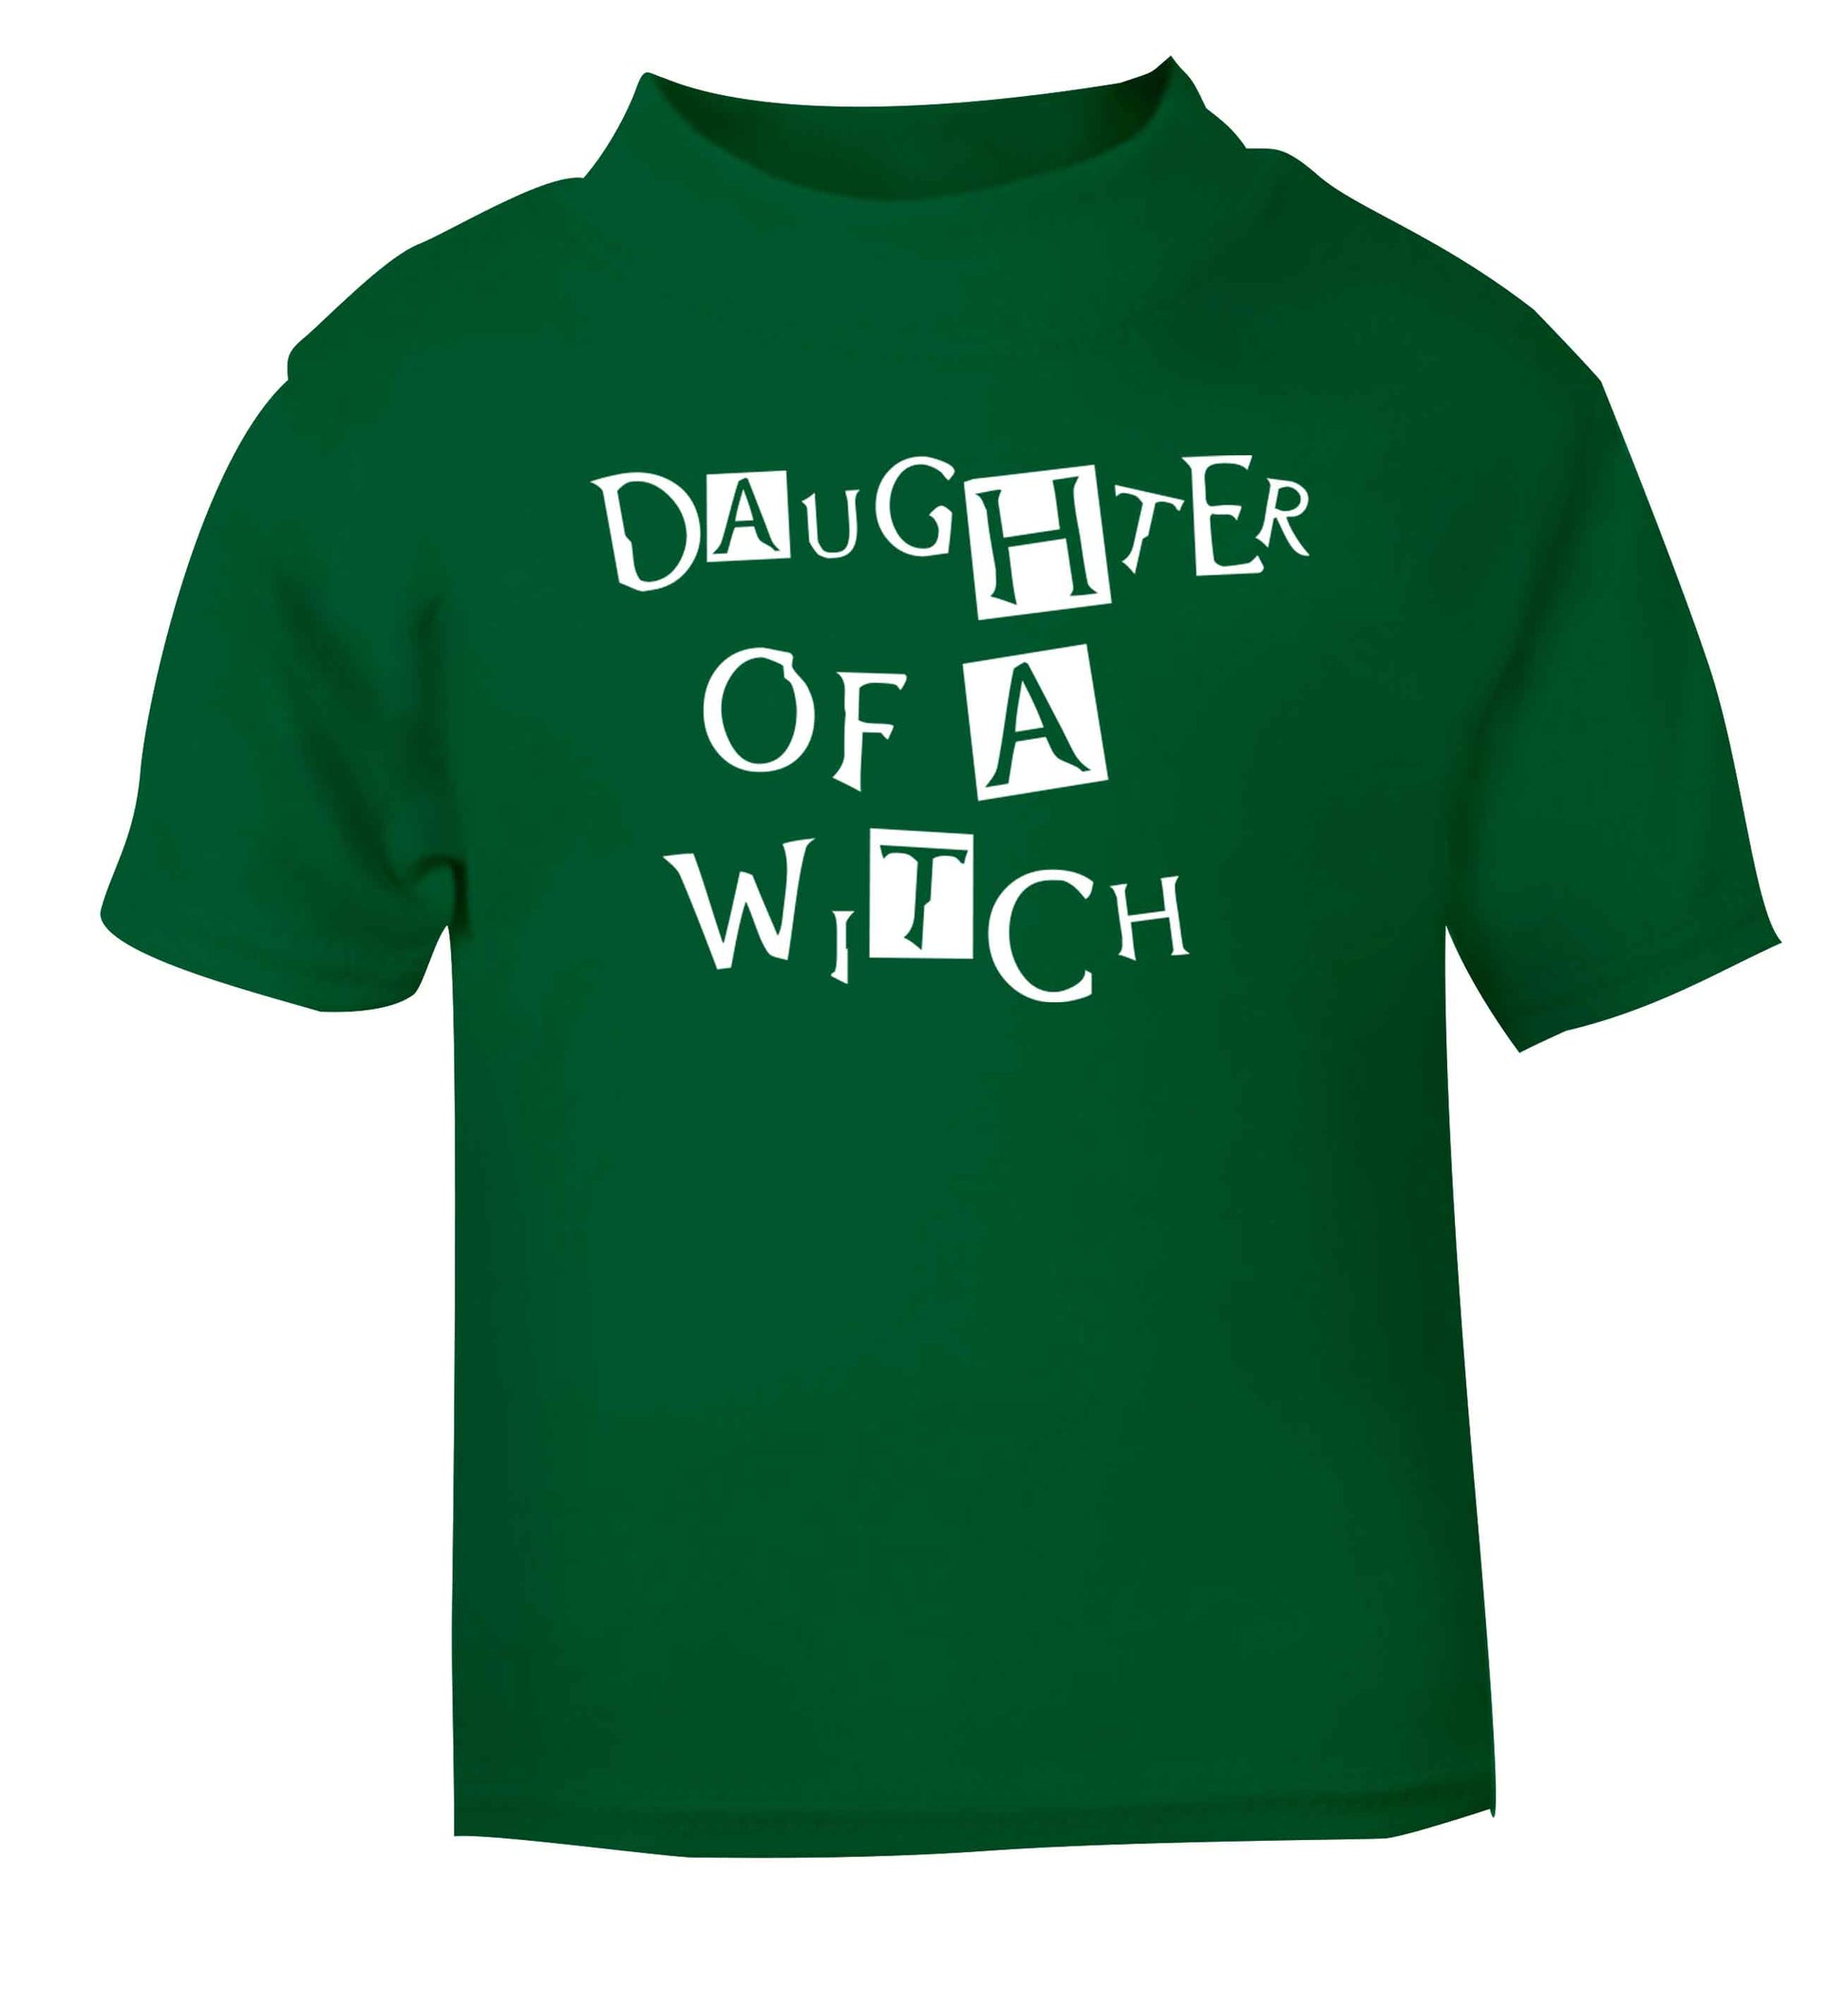 Daughter of a witch green baby toddler Tshirt 2 Years